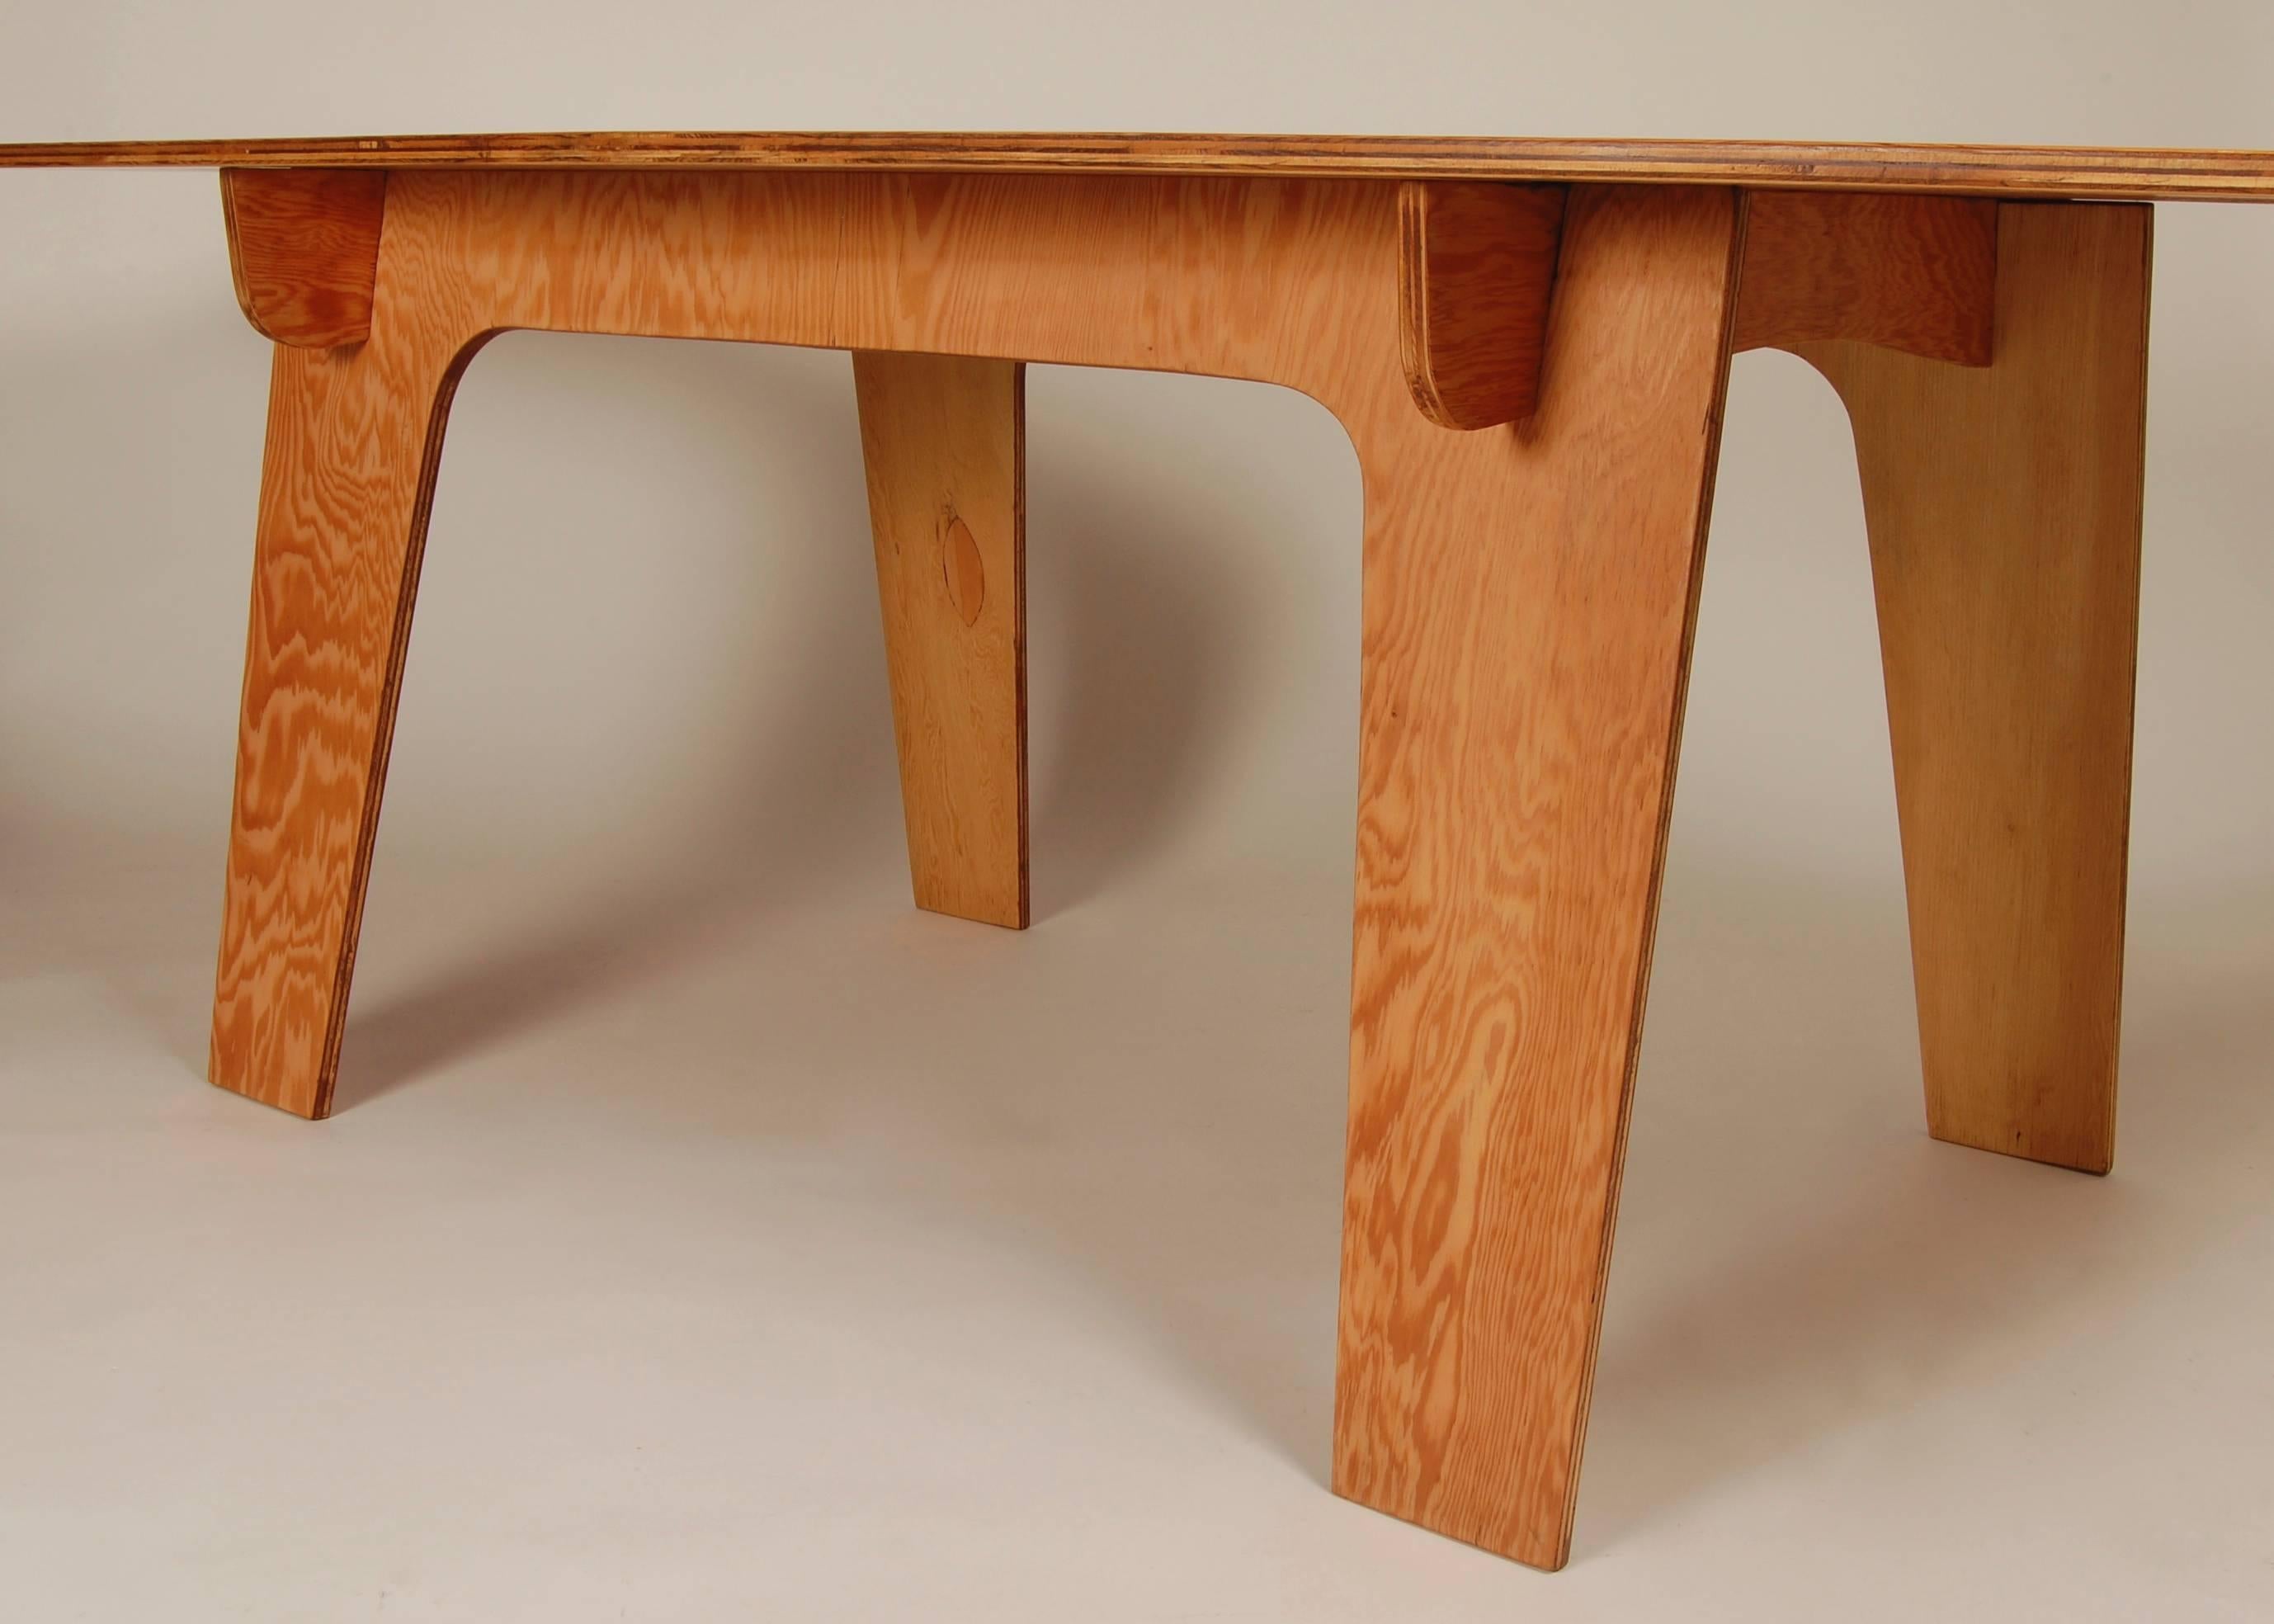 Farnsworth Plywood Dining Table In Excellent Condition For Sale In San Francisco, CA